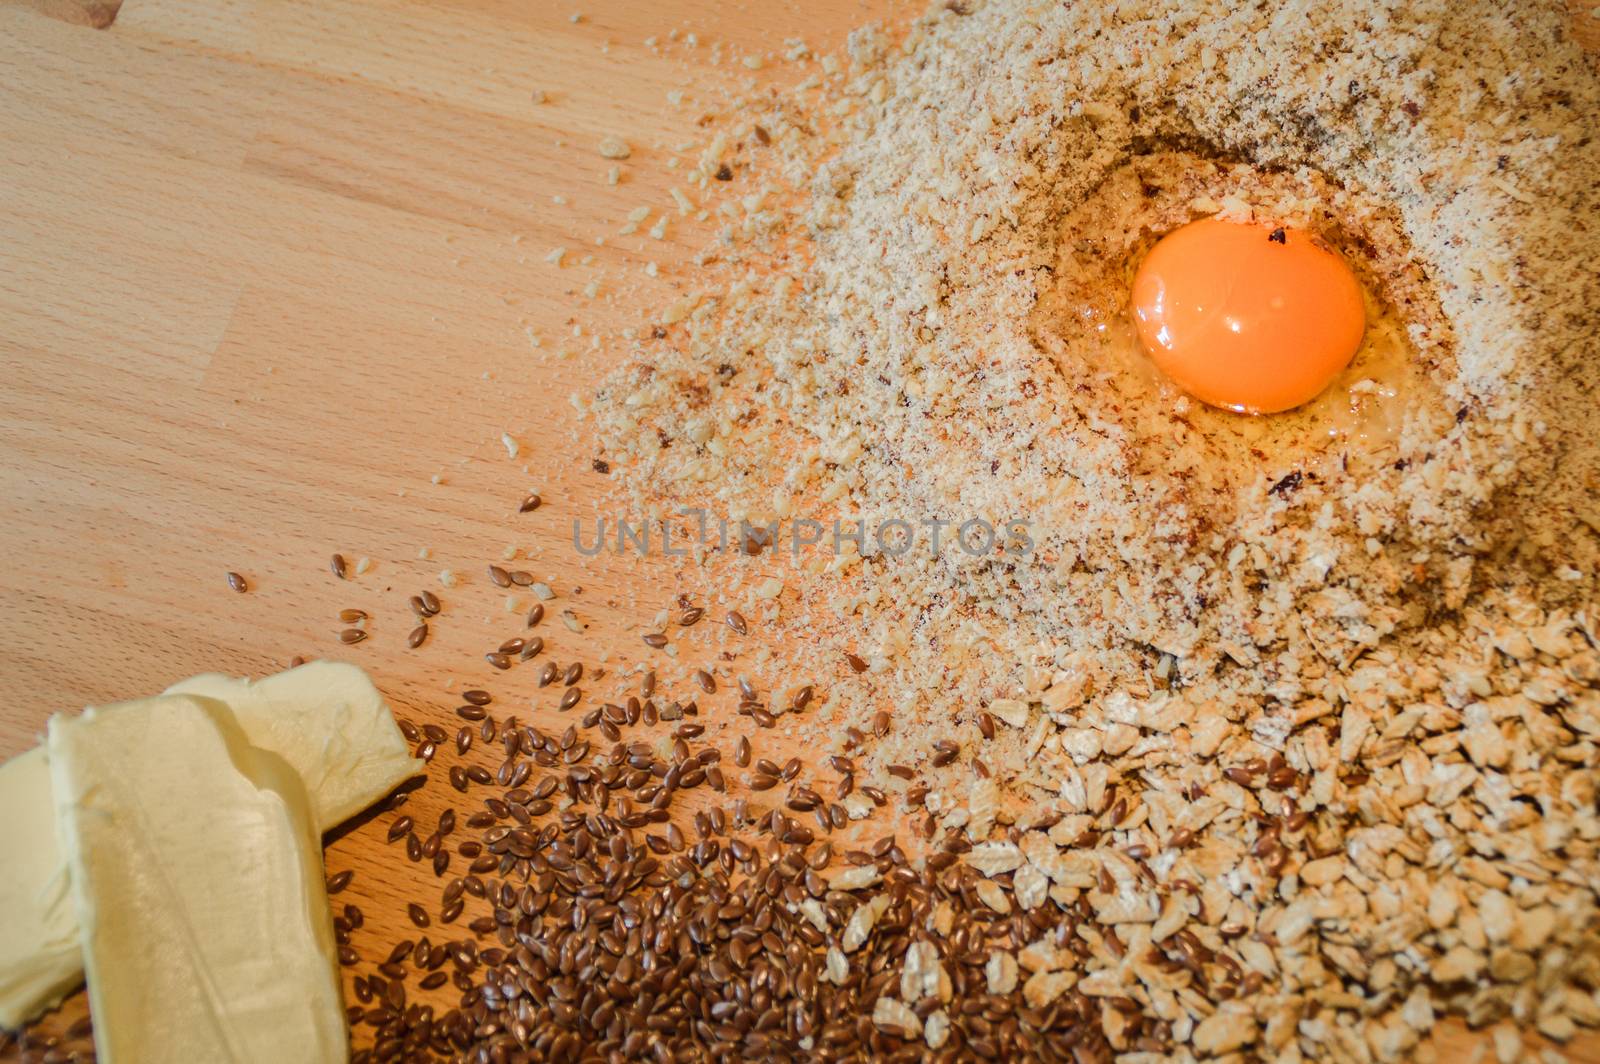 Egg and millet flour, ingredient for baking gluten-free bread